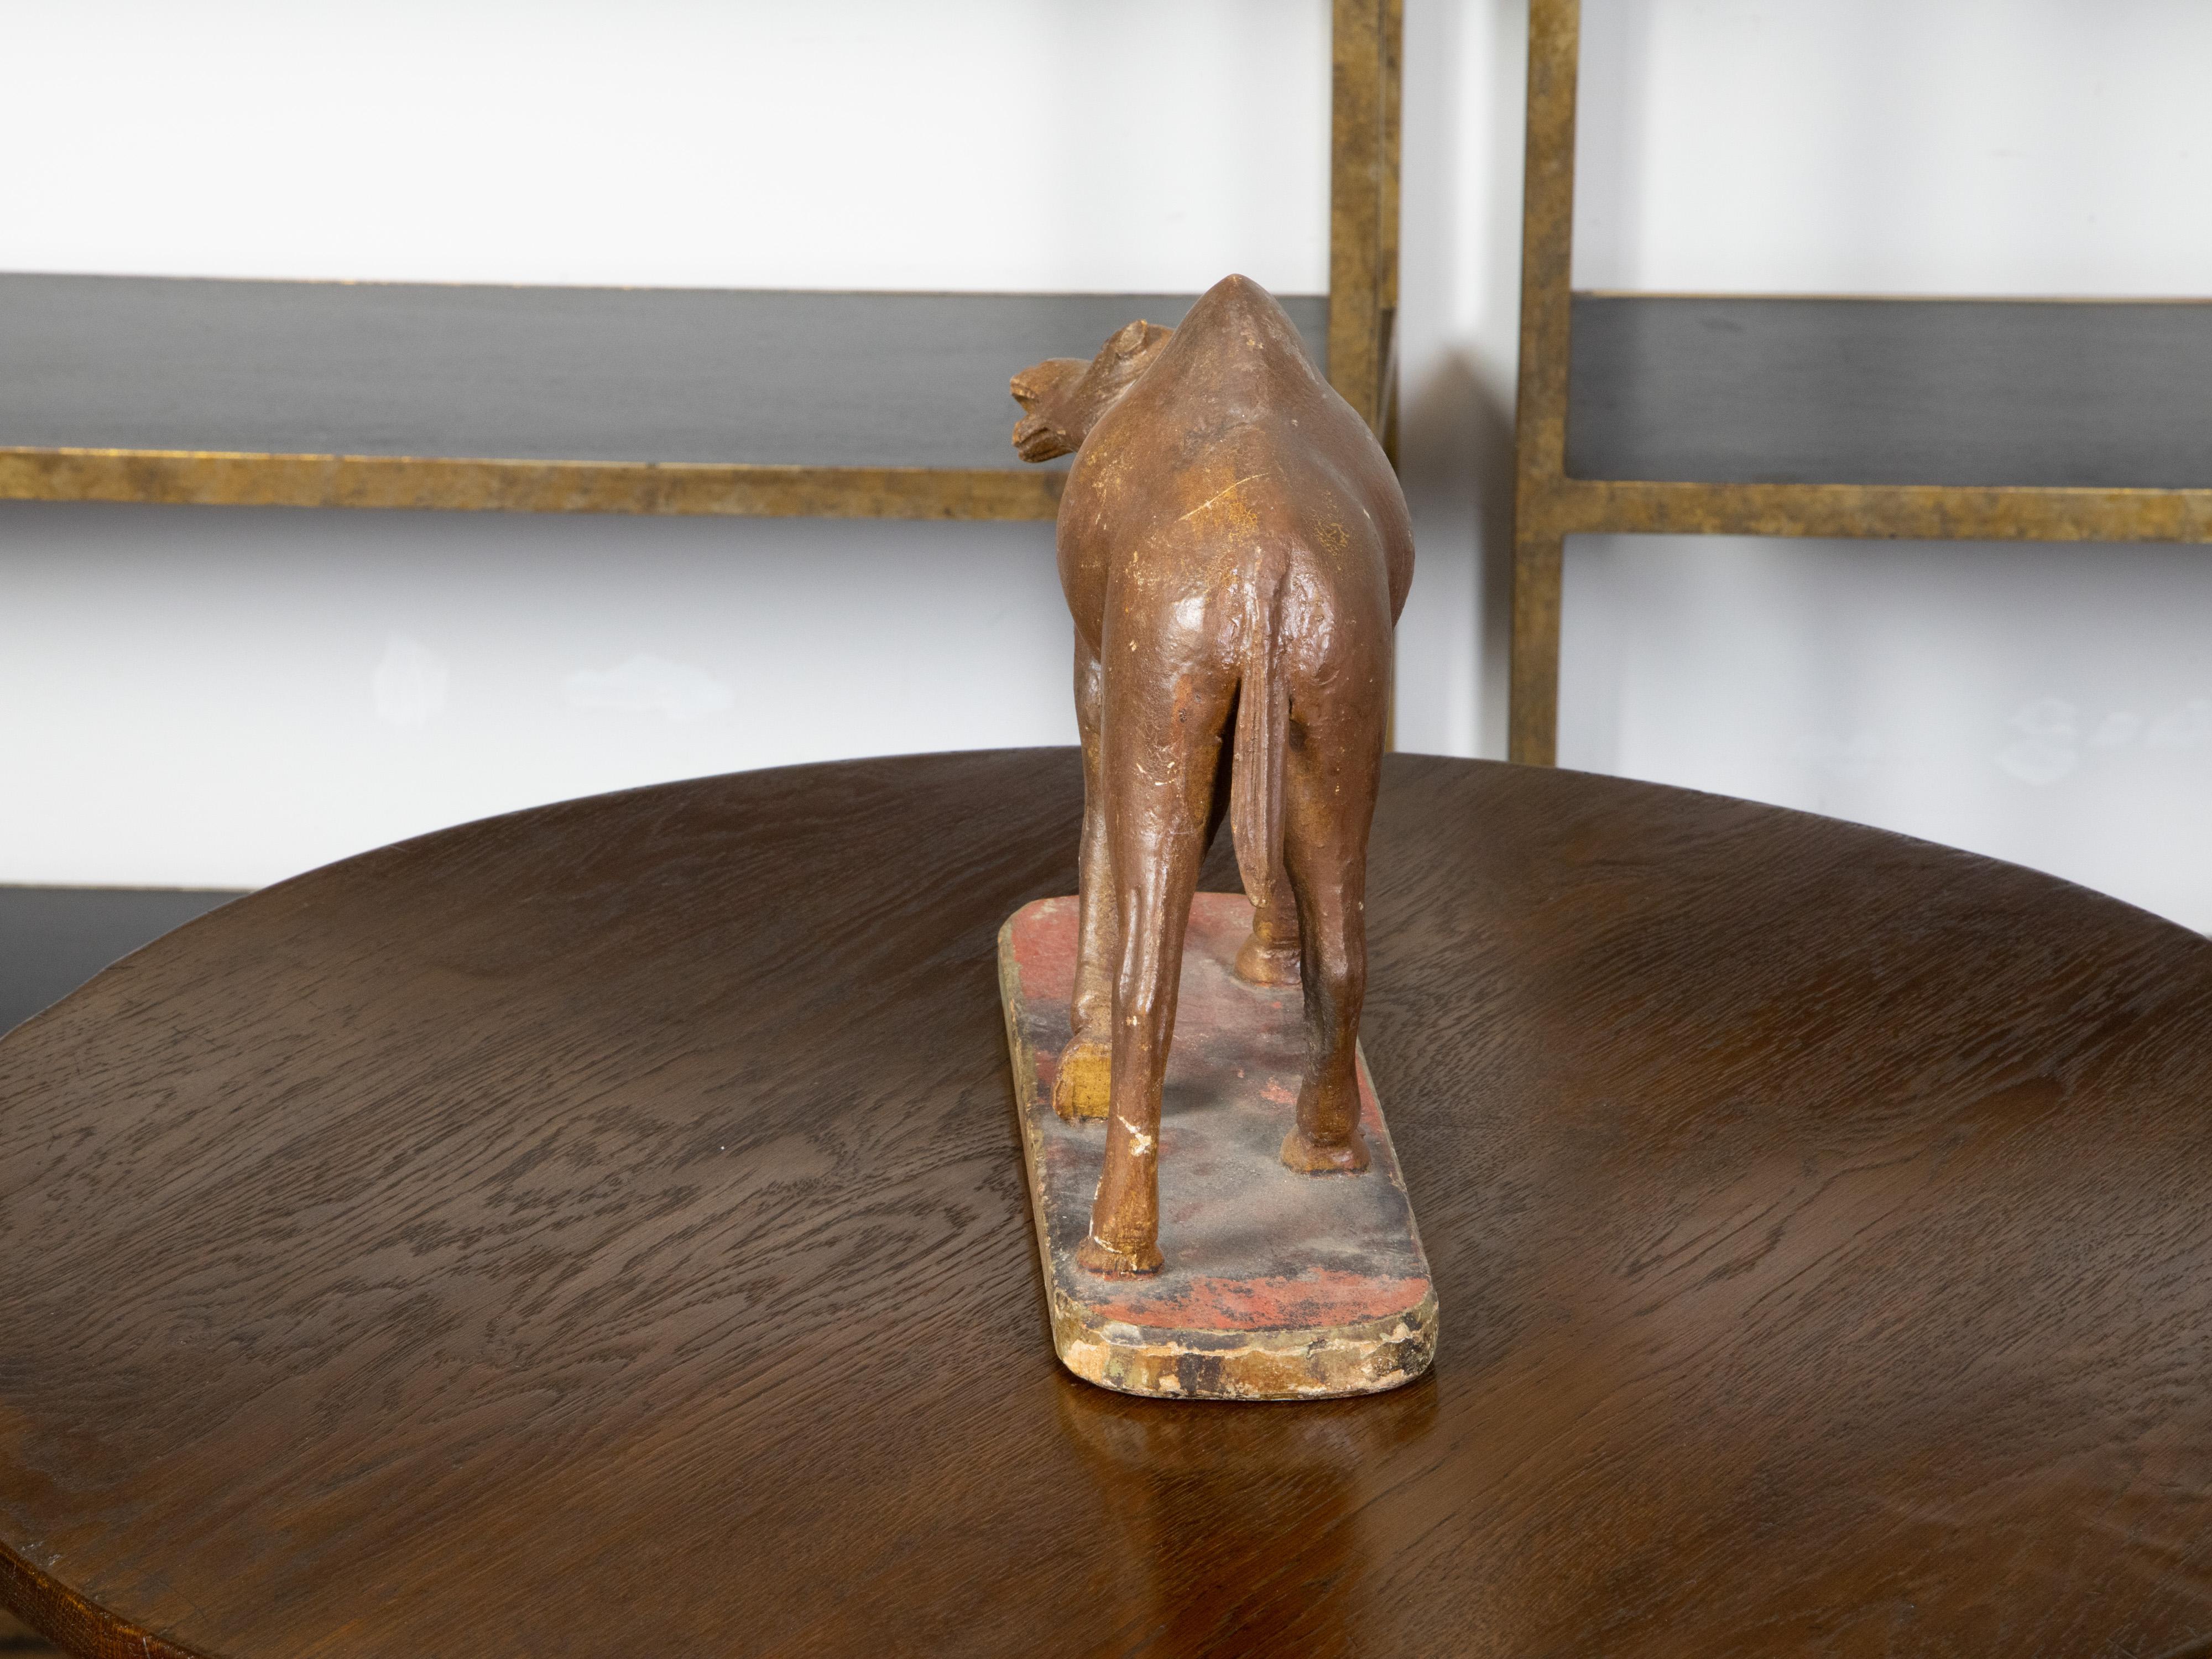 19th Century Italian Carved Wooden Dromedary Camel Sculpture on Oval Base For Sale 3